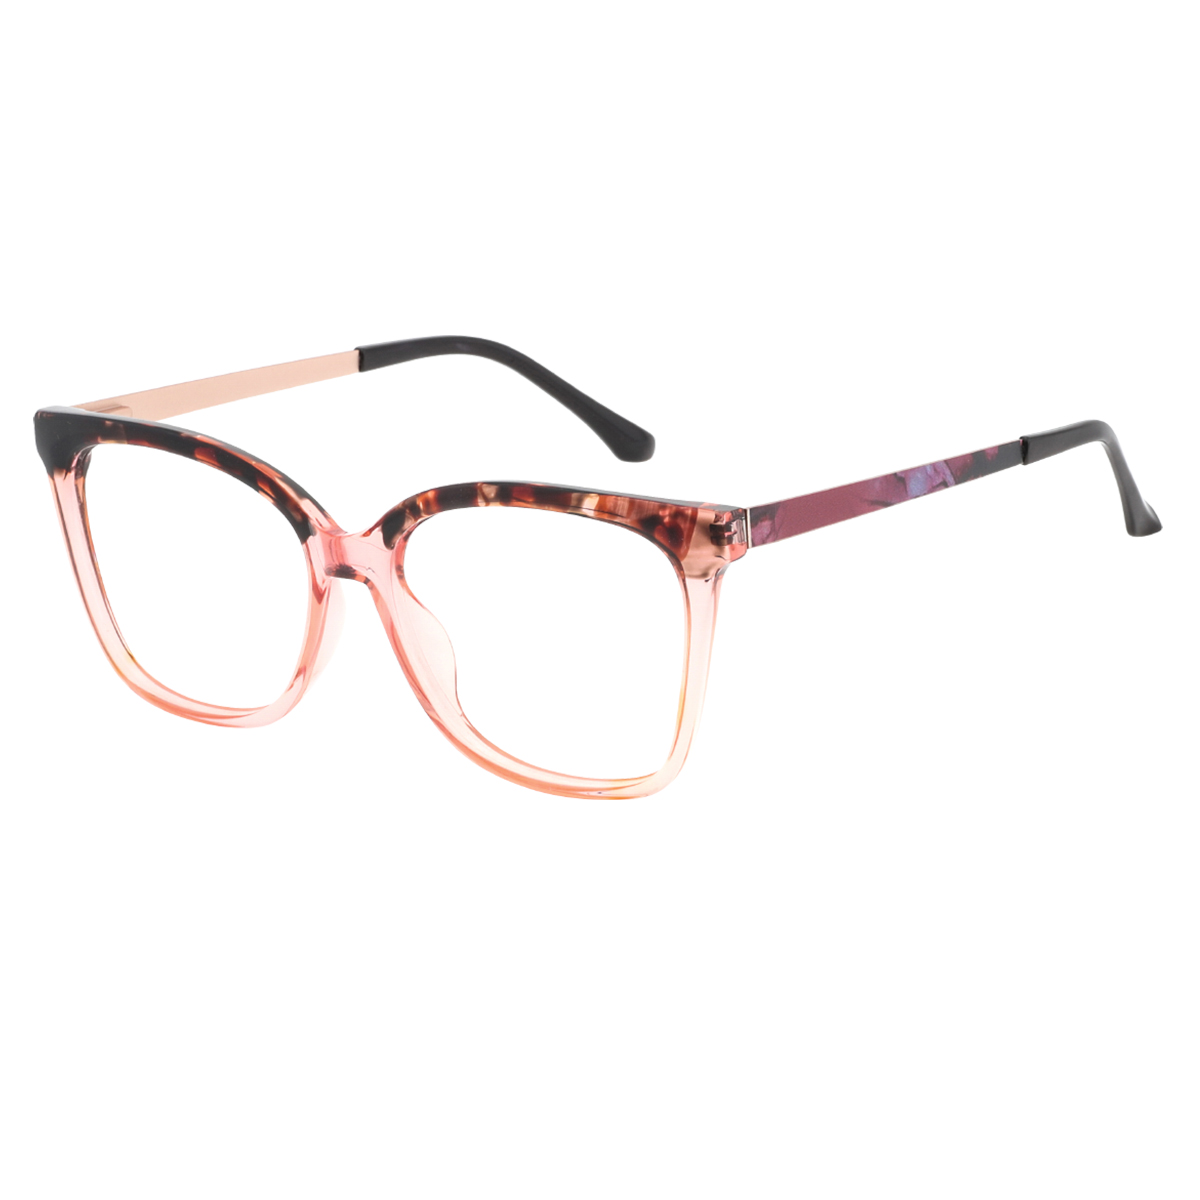 Tiryns - Square Transparent-pink Reading Glasses for Women